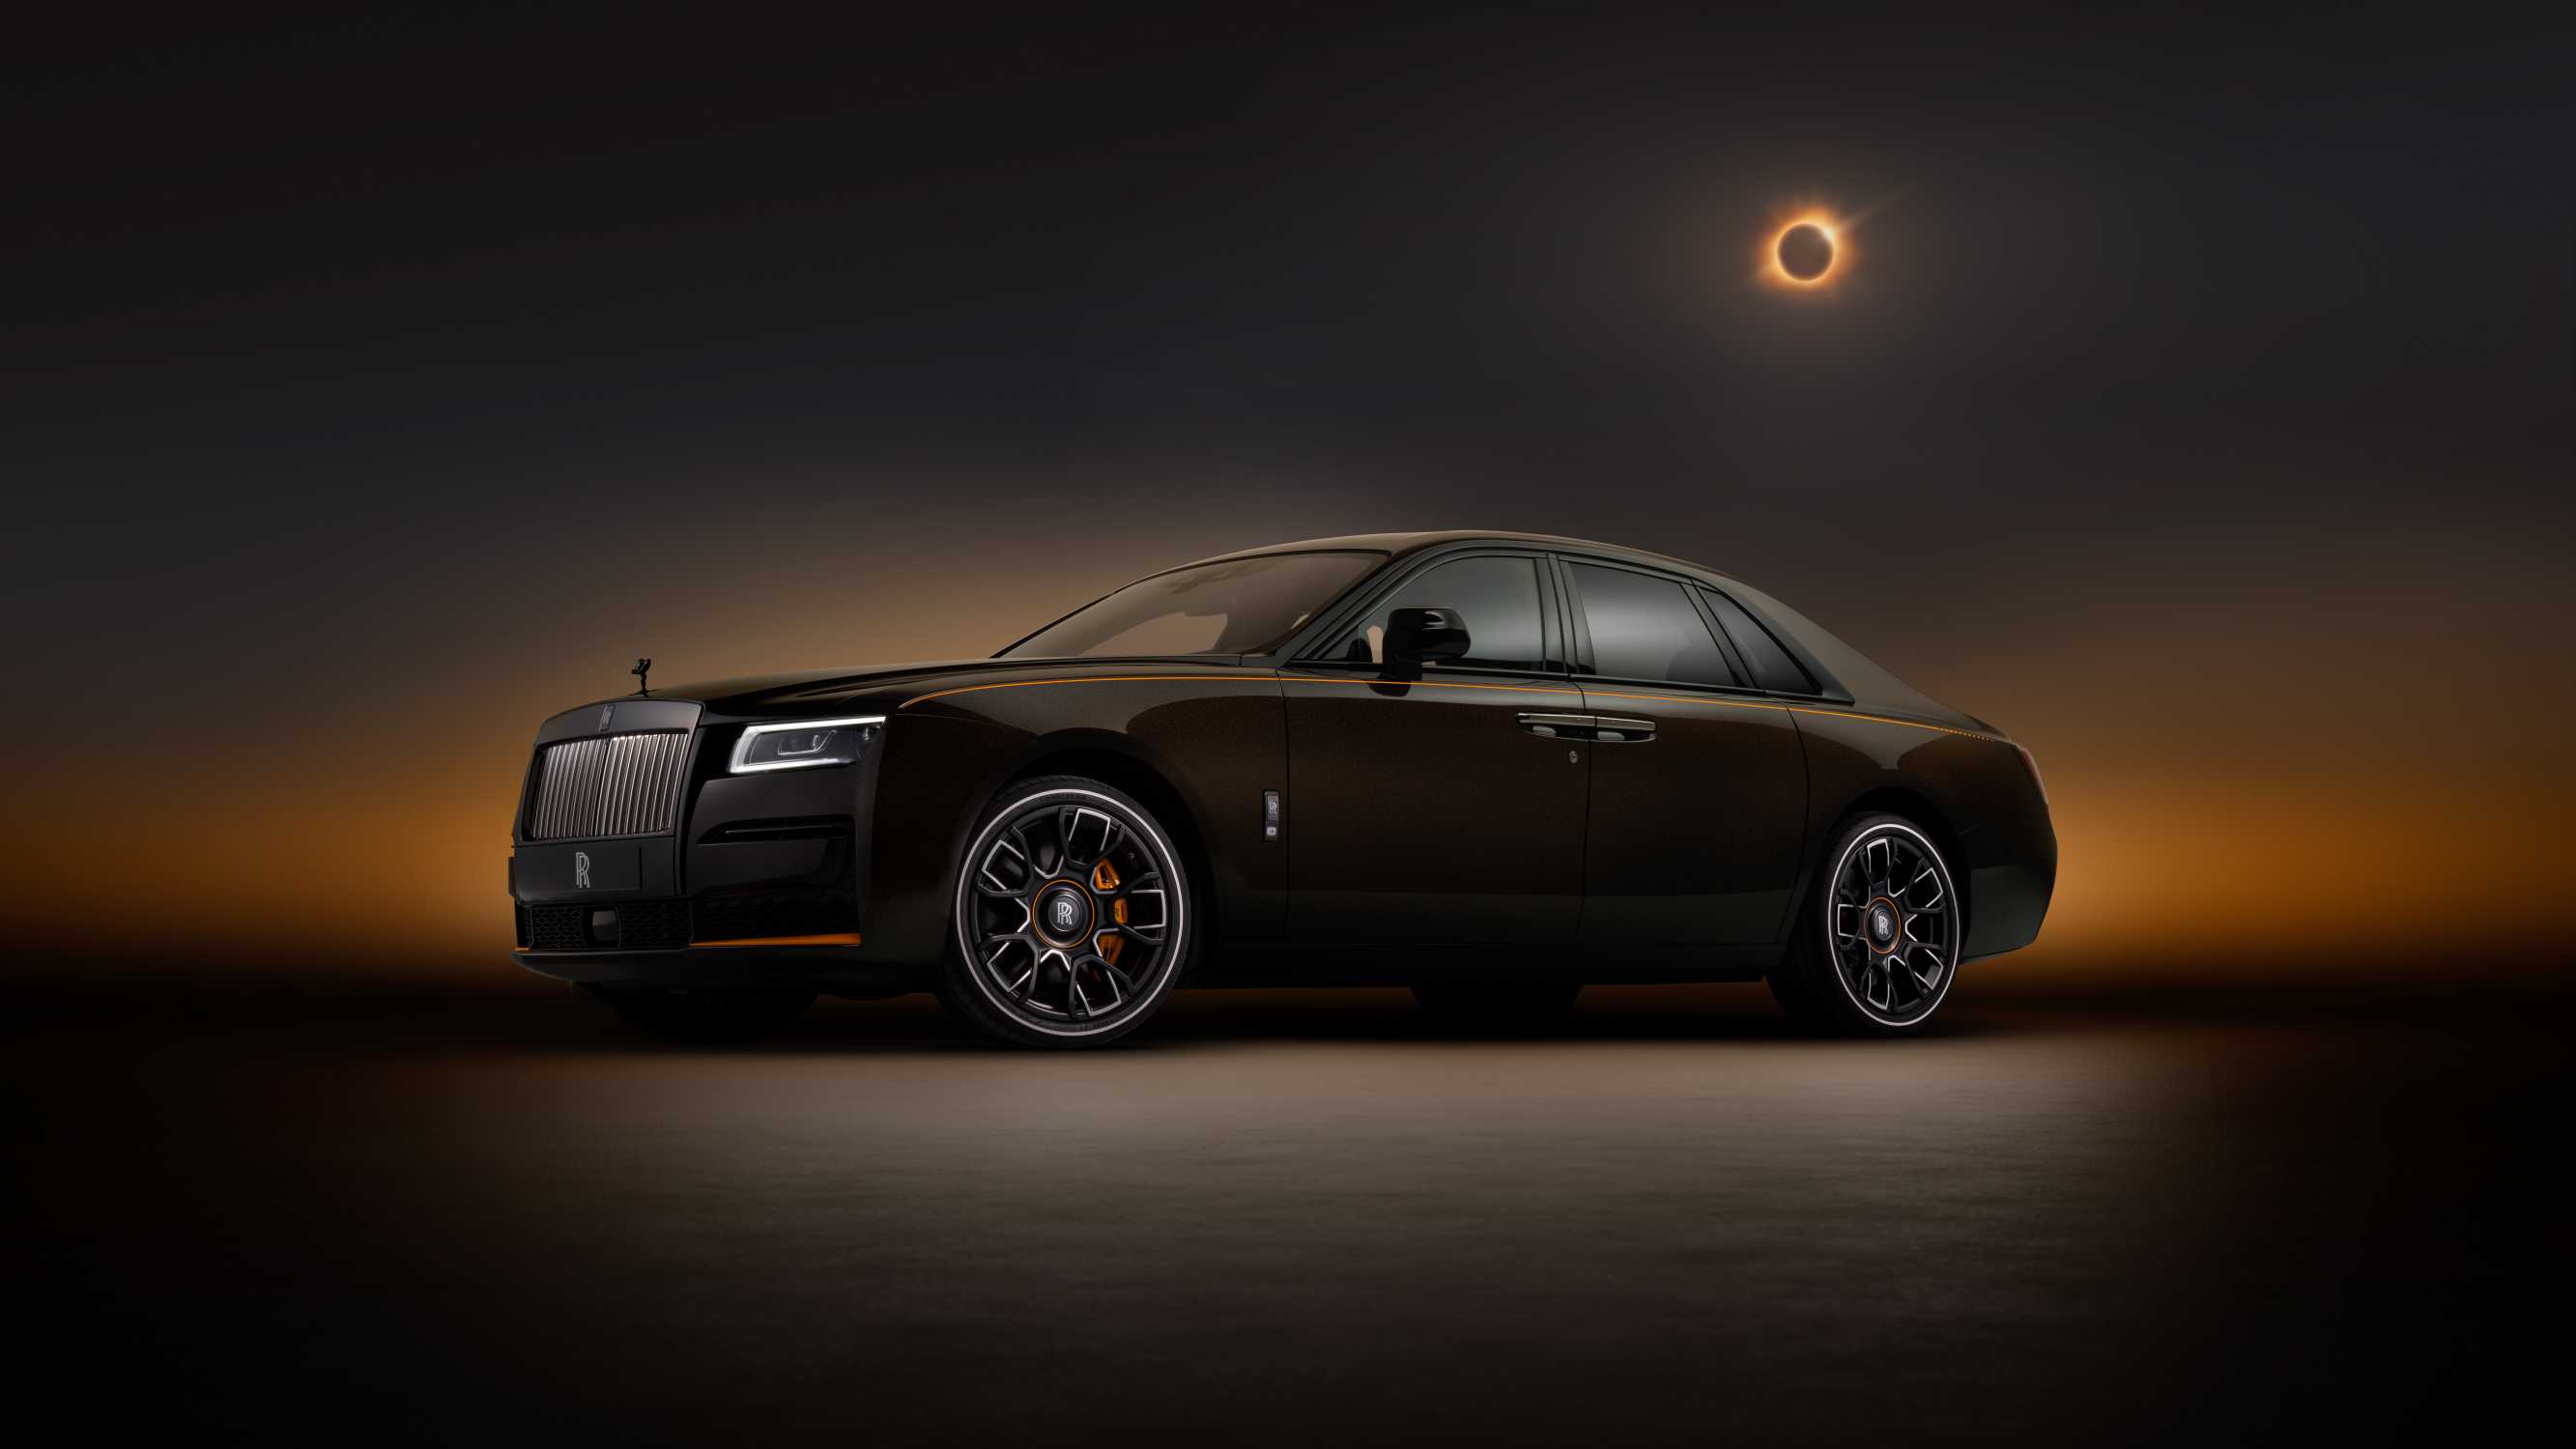 Introducing the Limited Edition Rolls-Royce Black Badge Ghost Ekleipsis ...